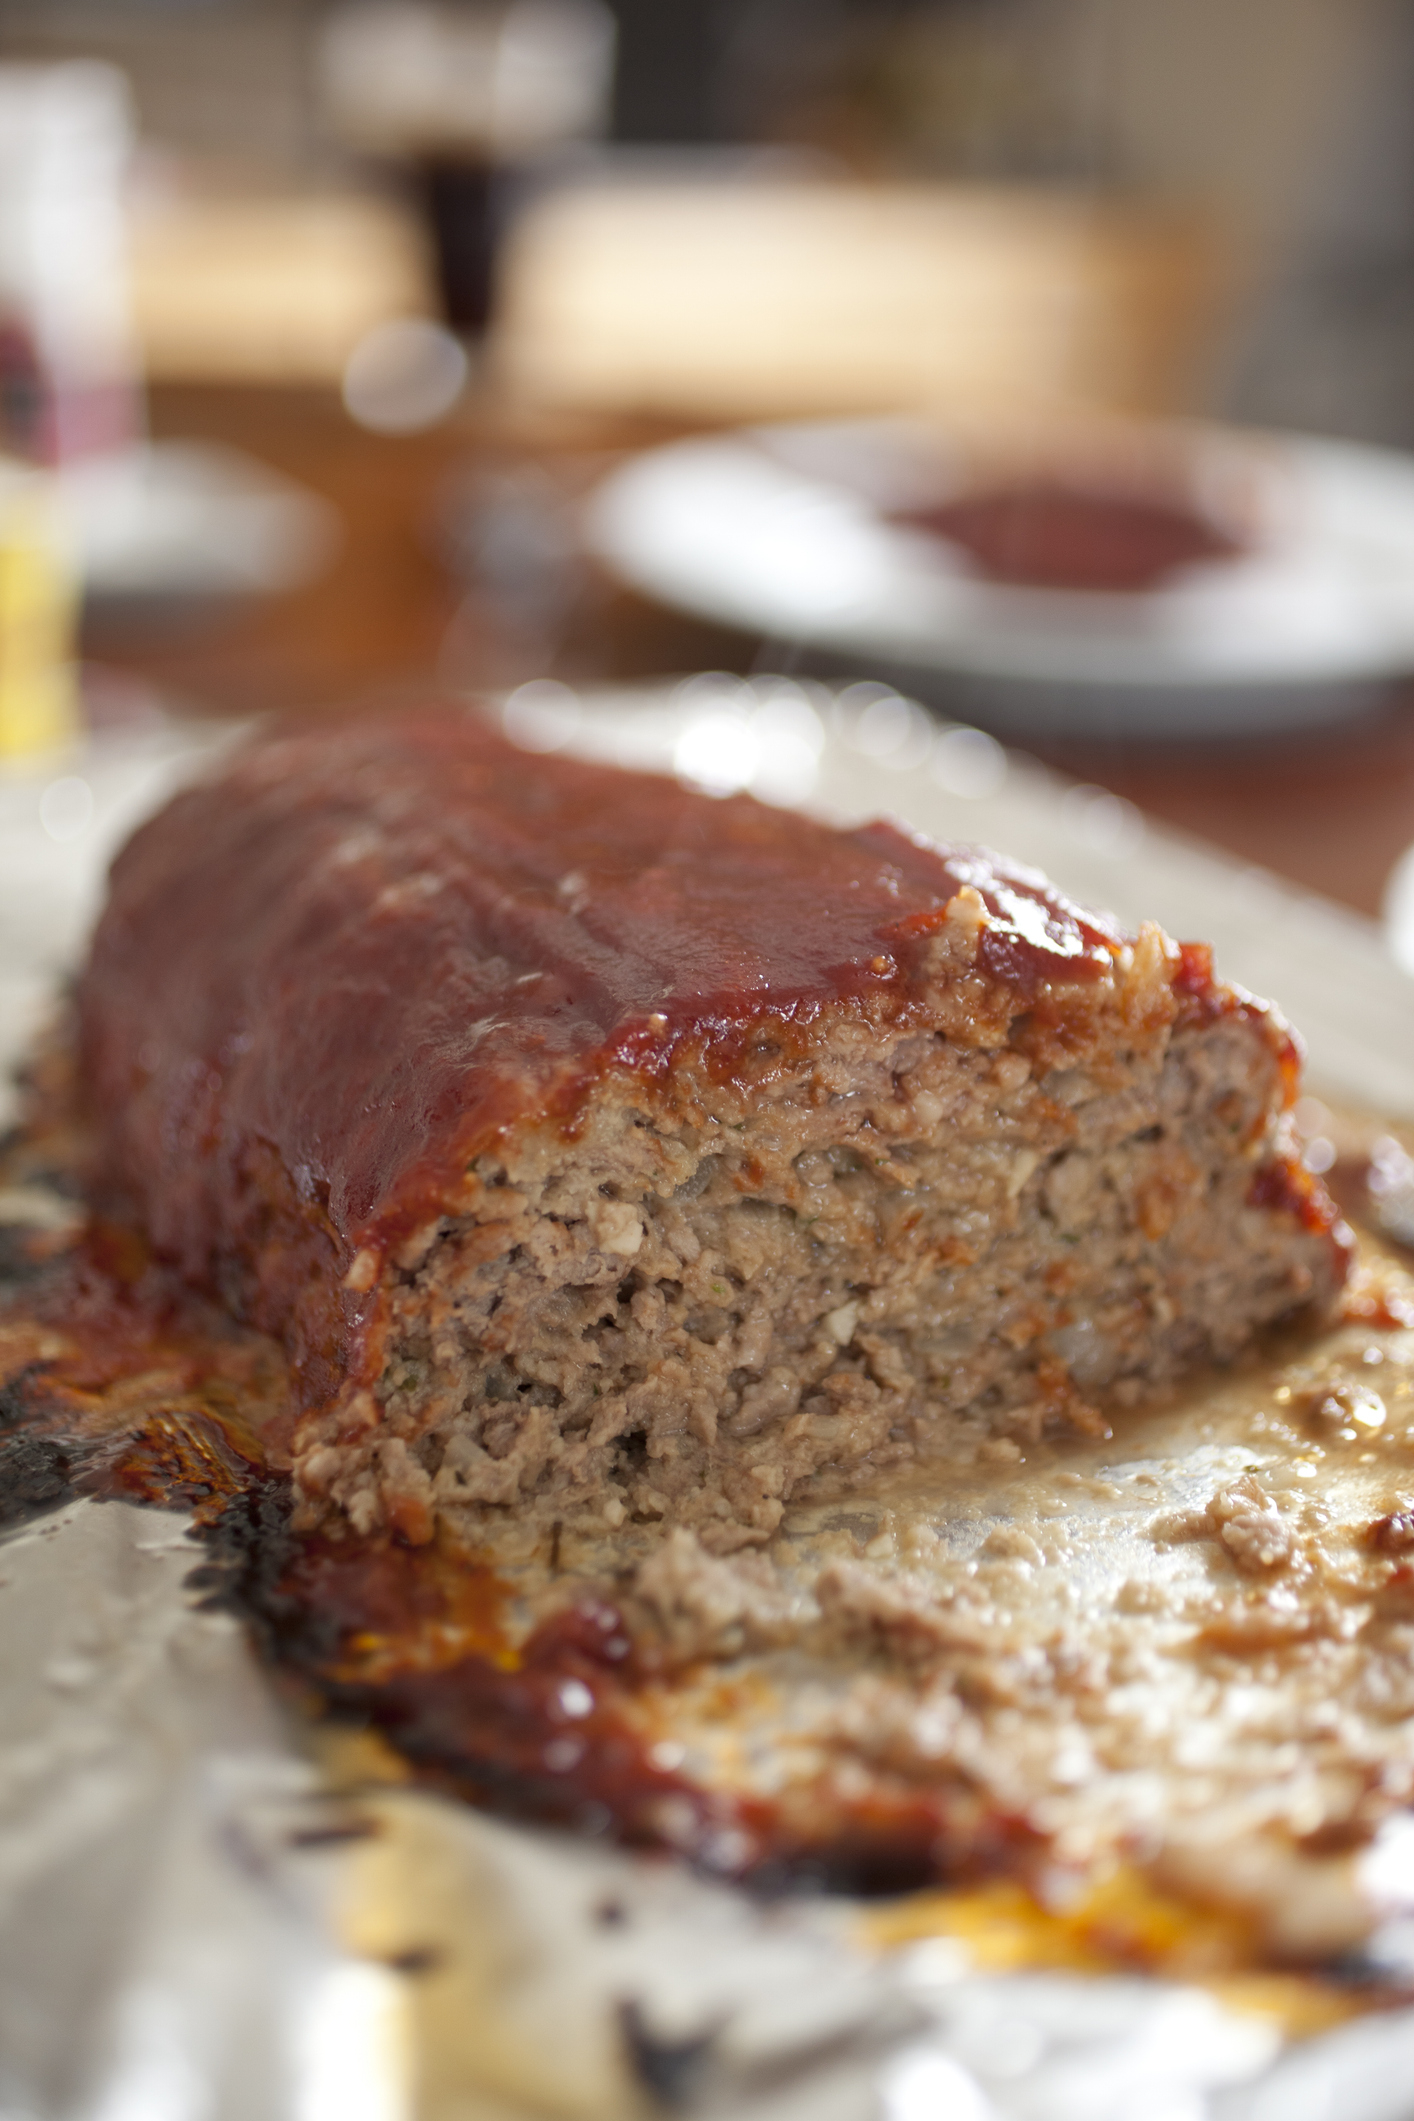 Close-up of a sliced meatloaf on a tray, with a blurred background